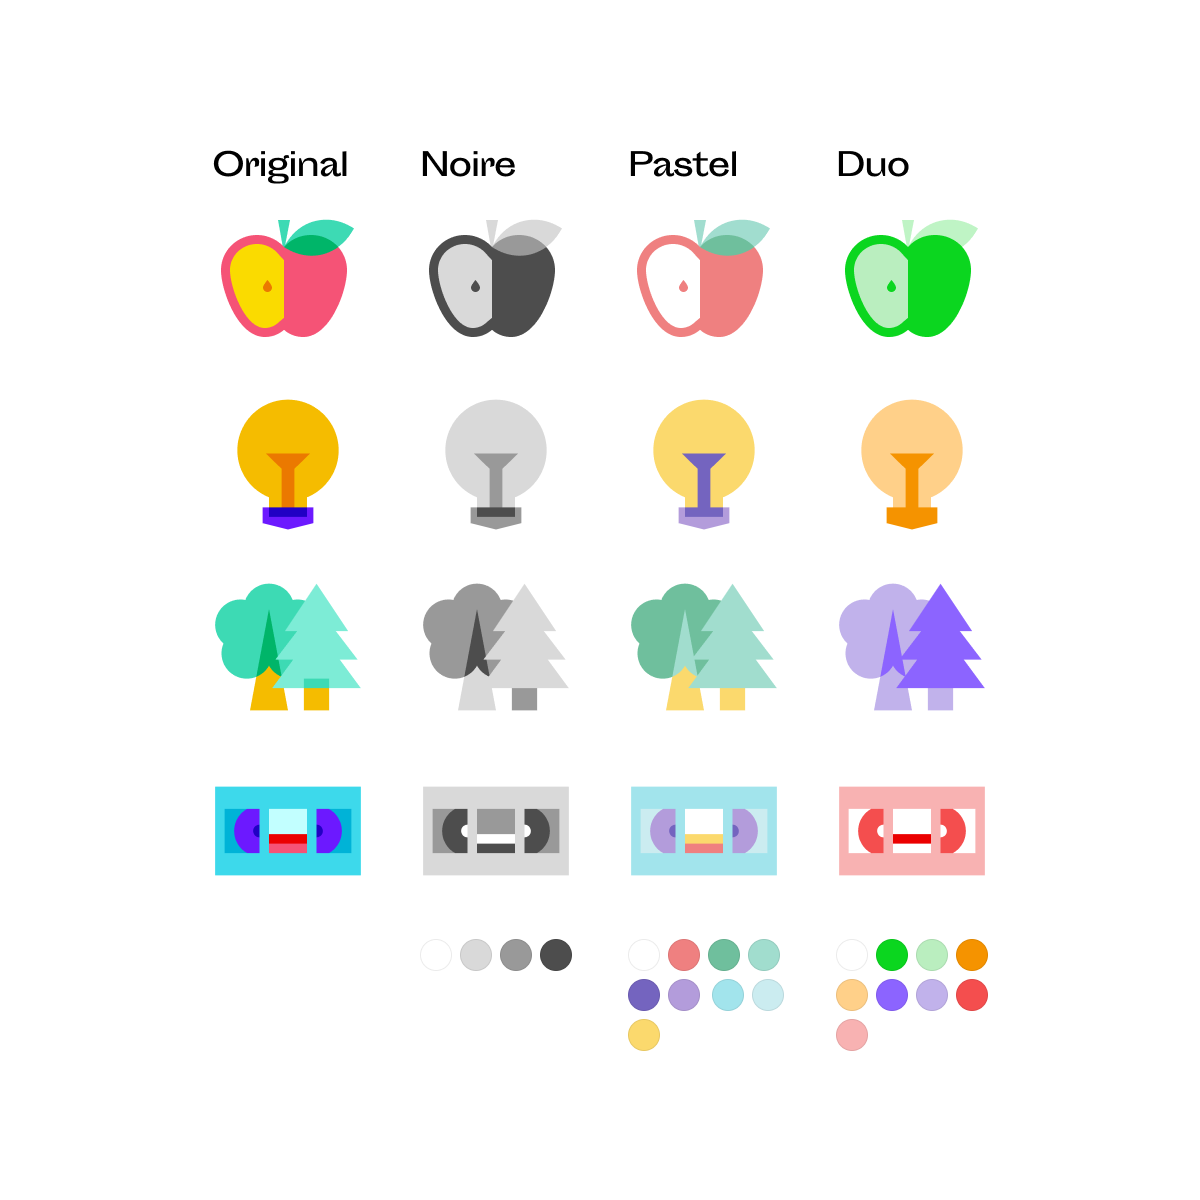 Color Glass Icons: 1,800+ geometric icons that look like gems